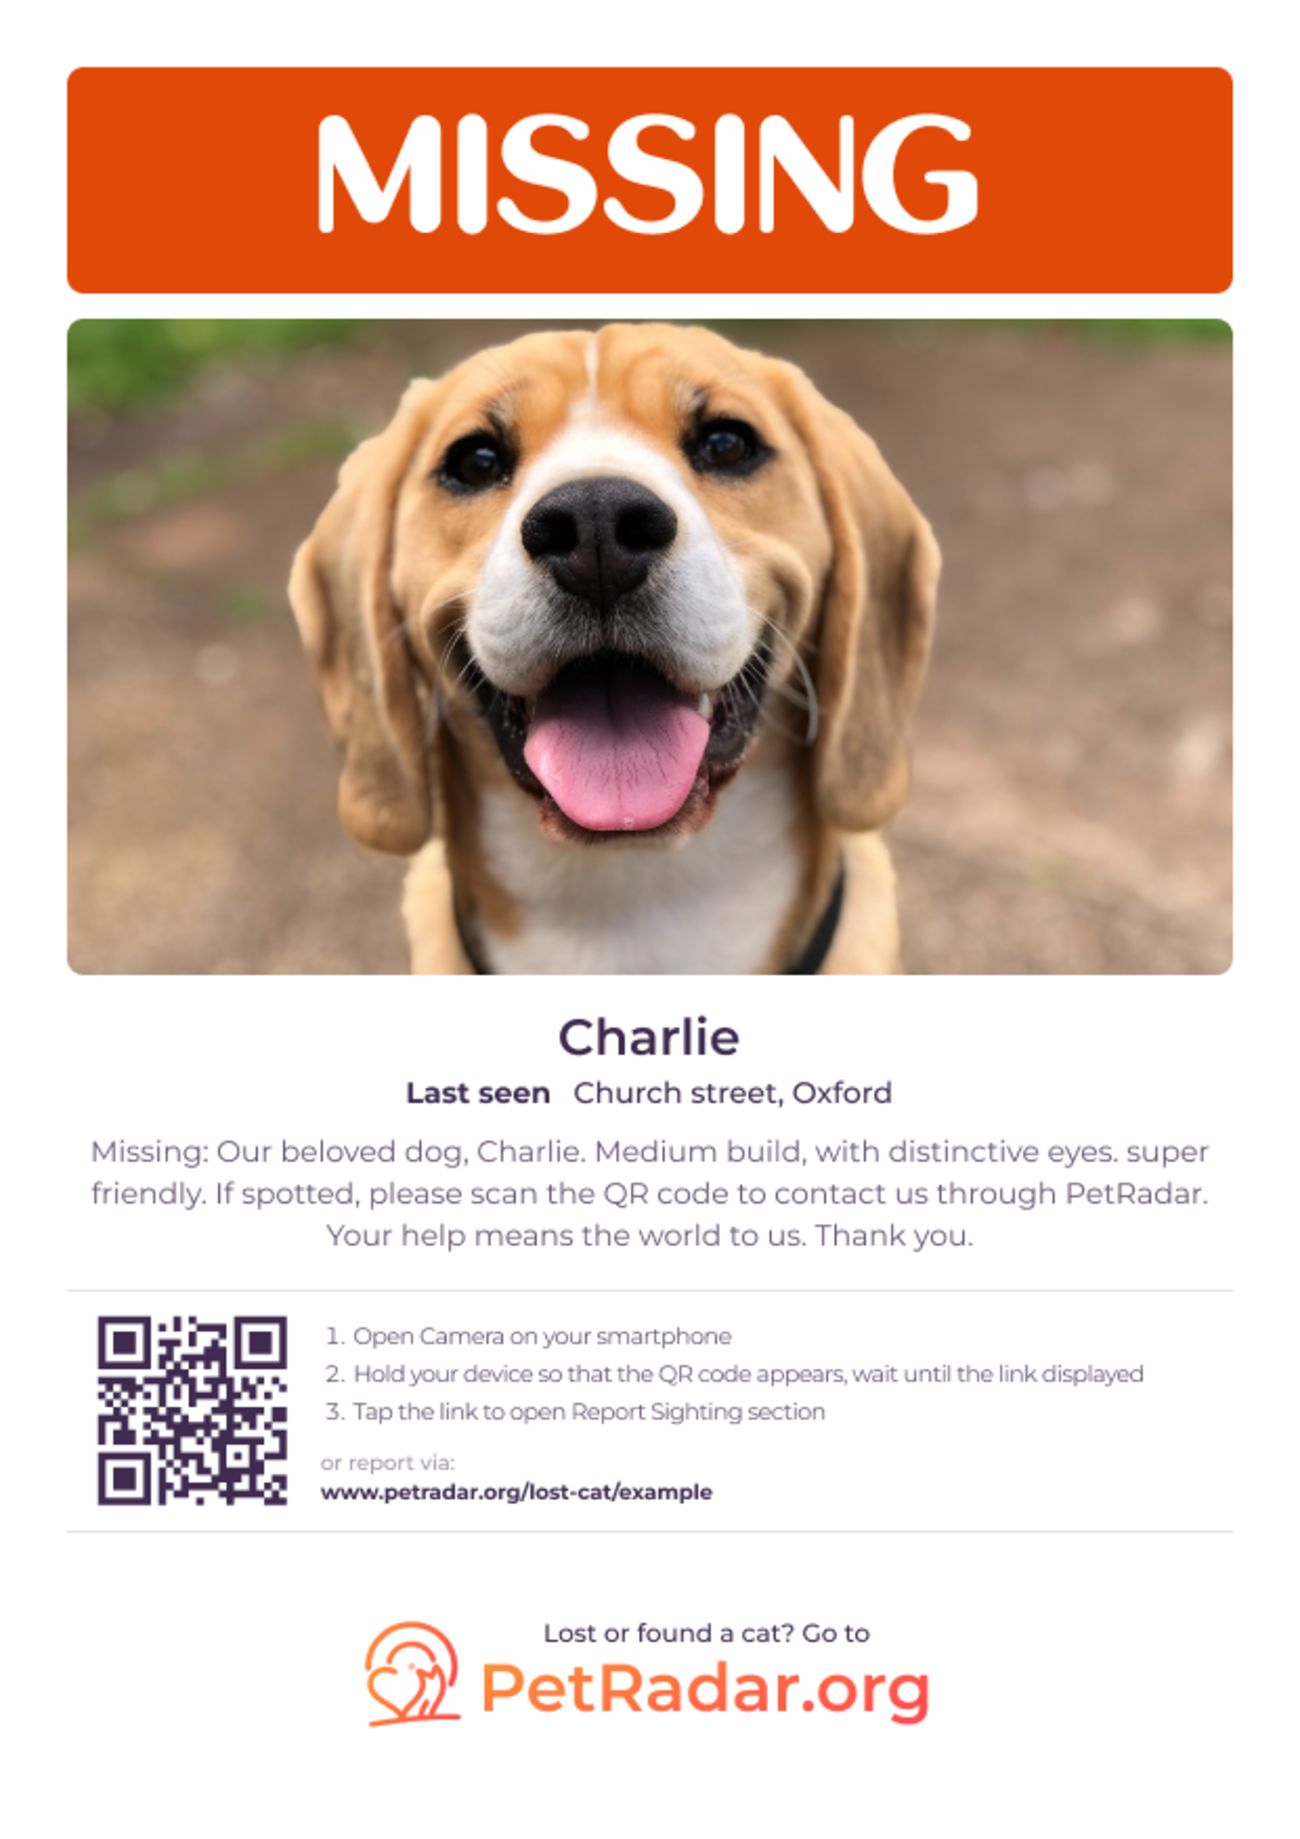 PetRadar's free downloadable and printabe missing dog poster